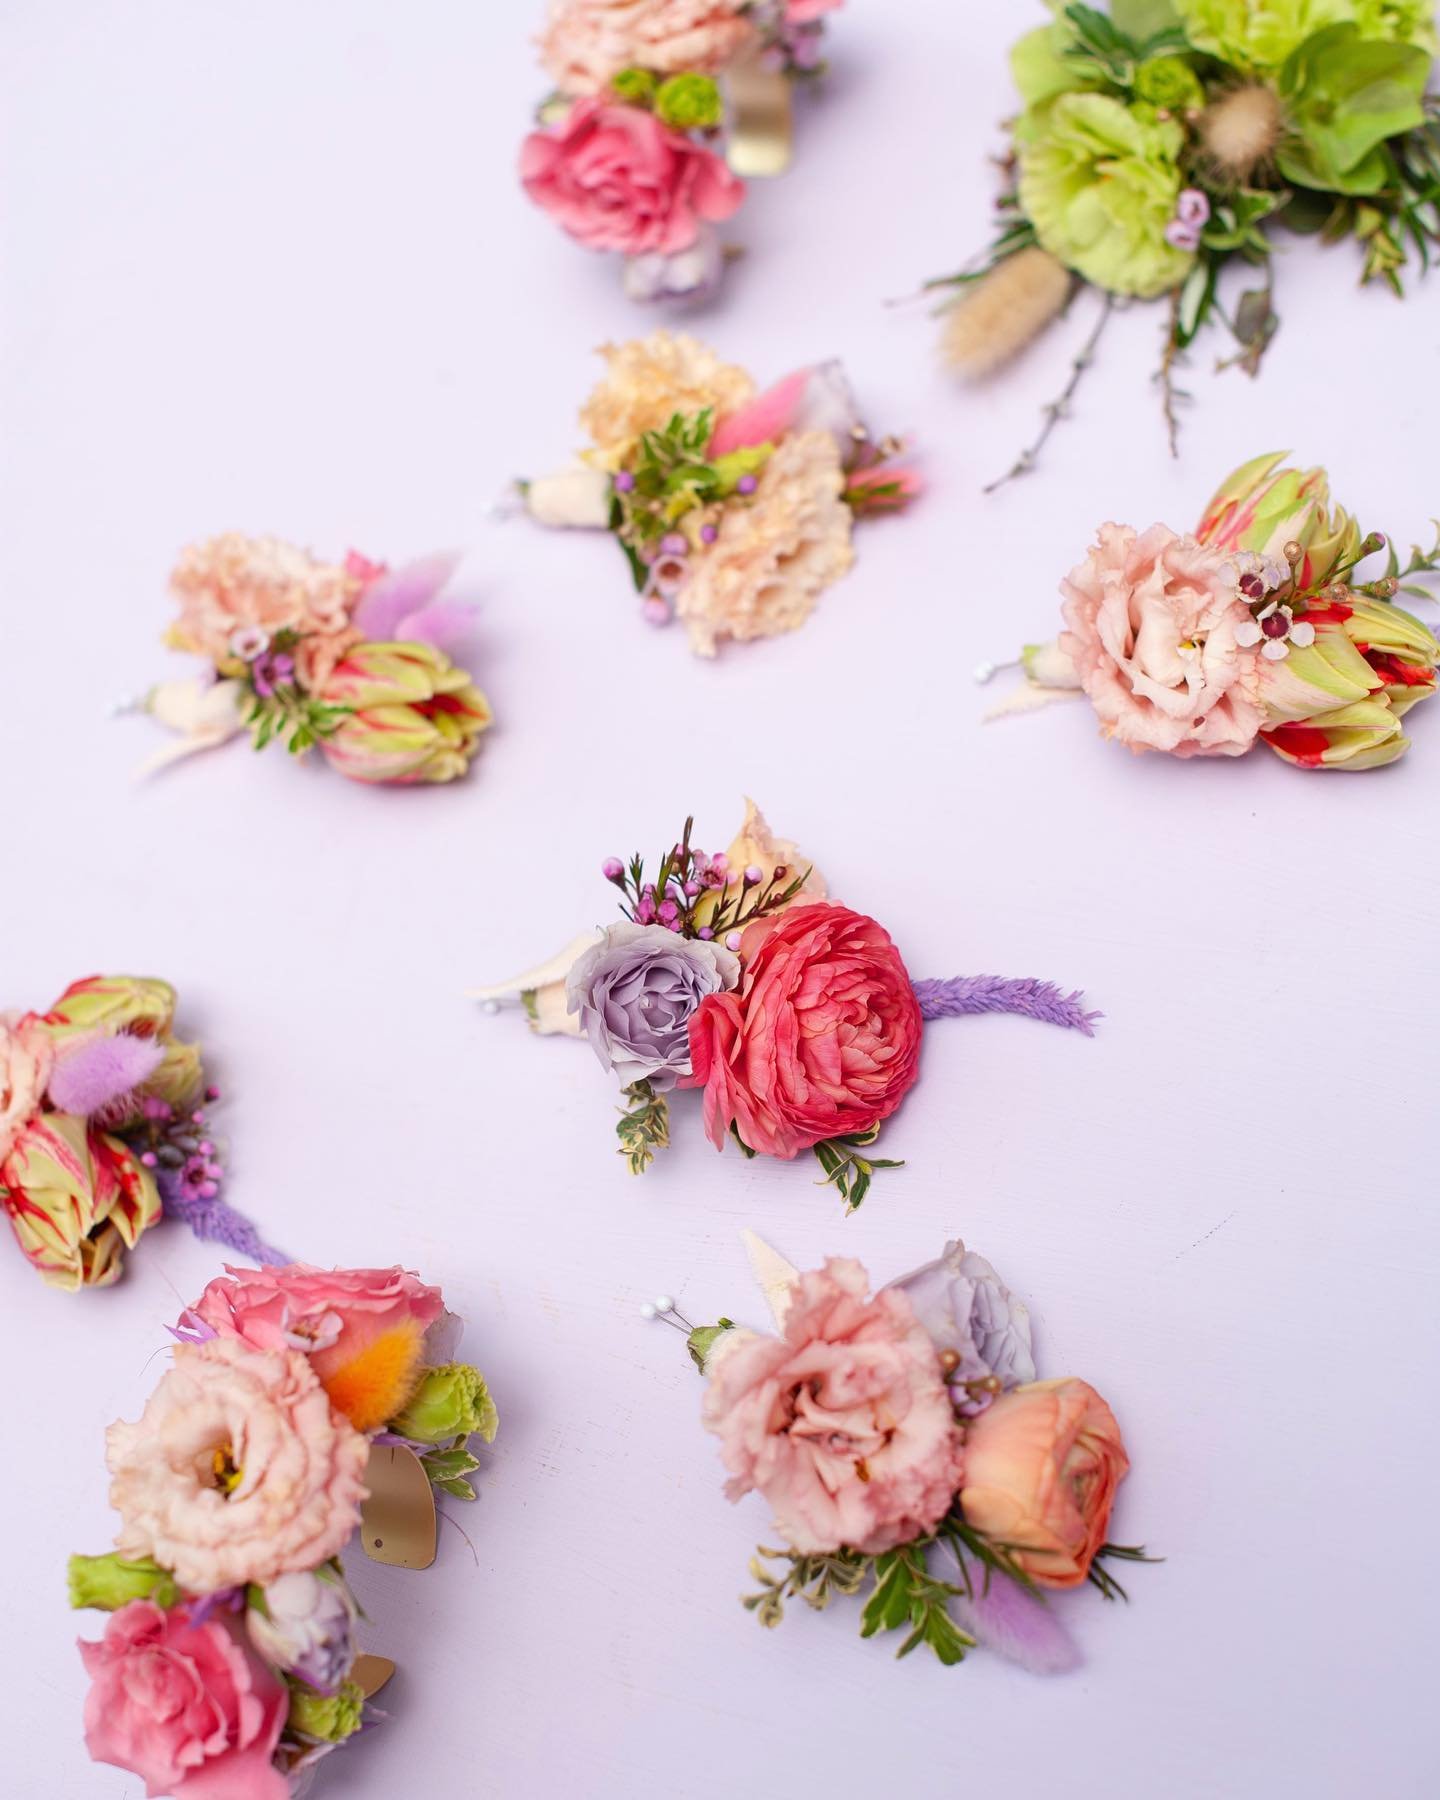 We believe corsages, boutonni&egrave;res, and pocket squares can be playful, fun, and unique just like the rest of your special day! This fun springy take on tulips, coral/lavender tones and playful dried elements is truly reinventing the wheel! At S